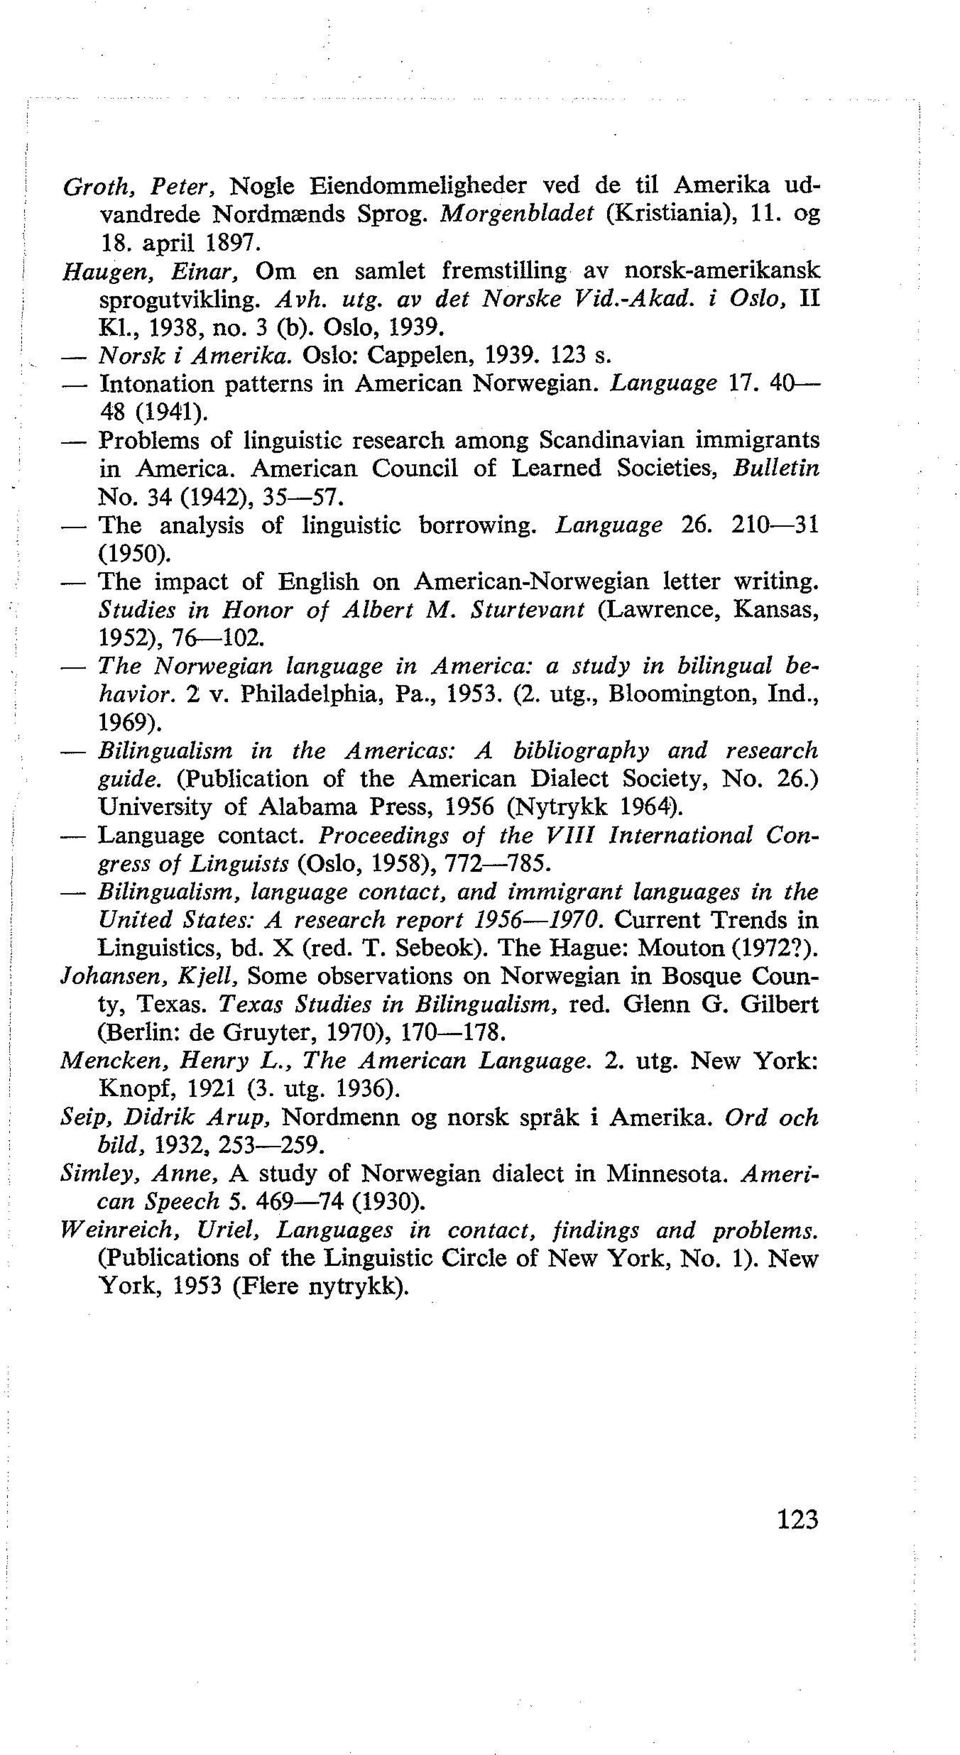 123 s. - Intonation patterns in American Norwegian. Language 17. 40-- 48 (1941). - Problems of linguistic research among Scandinavian immigrants in America.